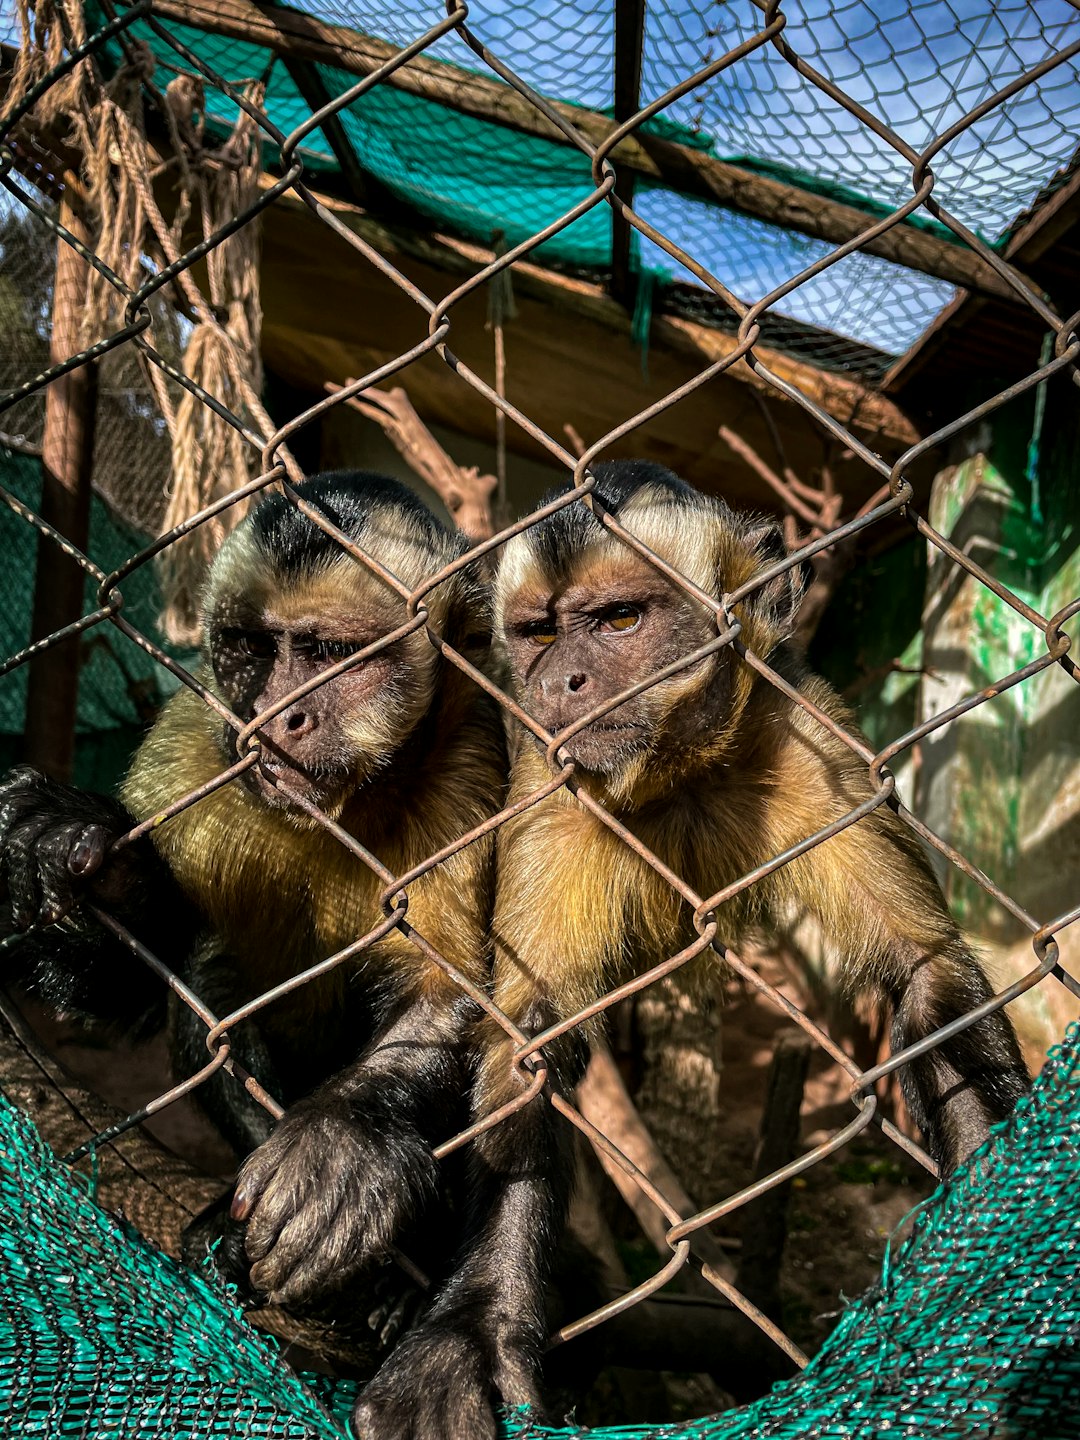 In a moment that tugs at the heartstrings, two capuchin monkeys huddle close, their expressive eyes peering through the diamond shapes of a wire fence. Their golden-brown fur contrasts with the green hues of their enclosure, highlighting the complexity of their emotions and the stark reality of their captivity. The image serves as a profound reminder of the delicate relationship between wildlife and human stewardship, ideal for sparking discussions on conservation, animal welfare, or the ethics of animal habitats in zoological settings.